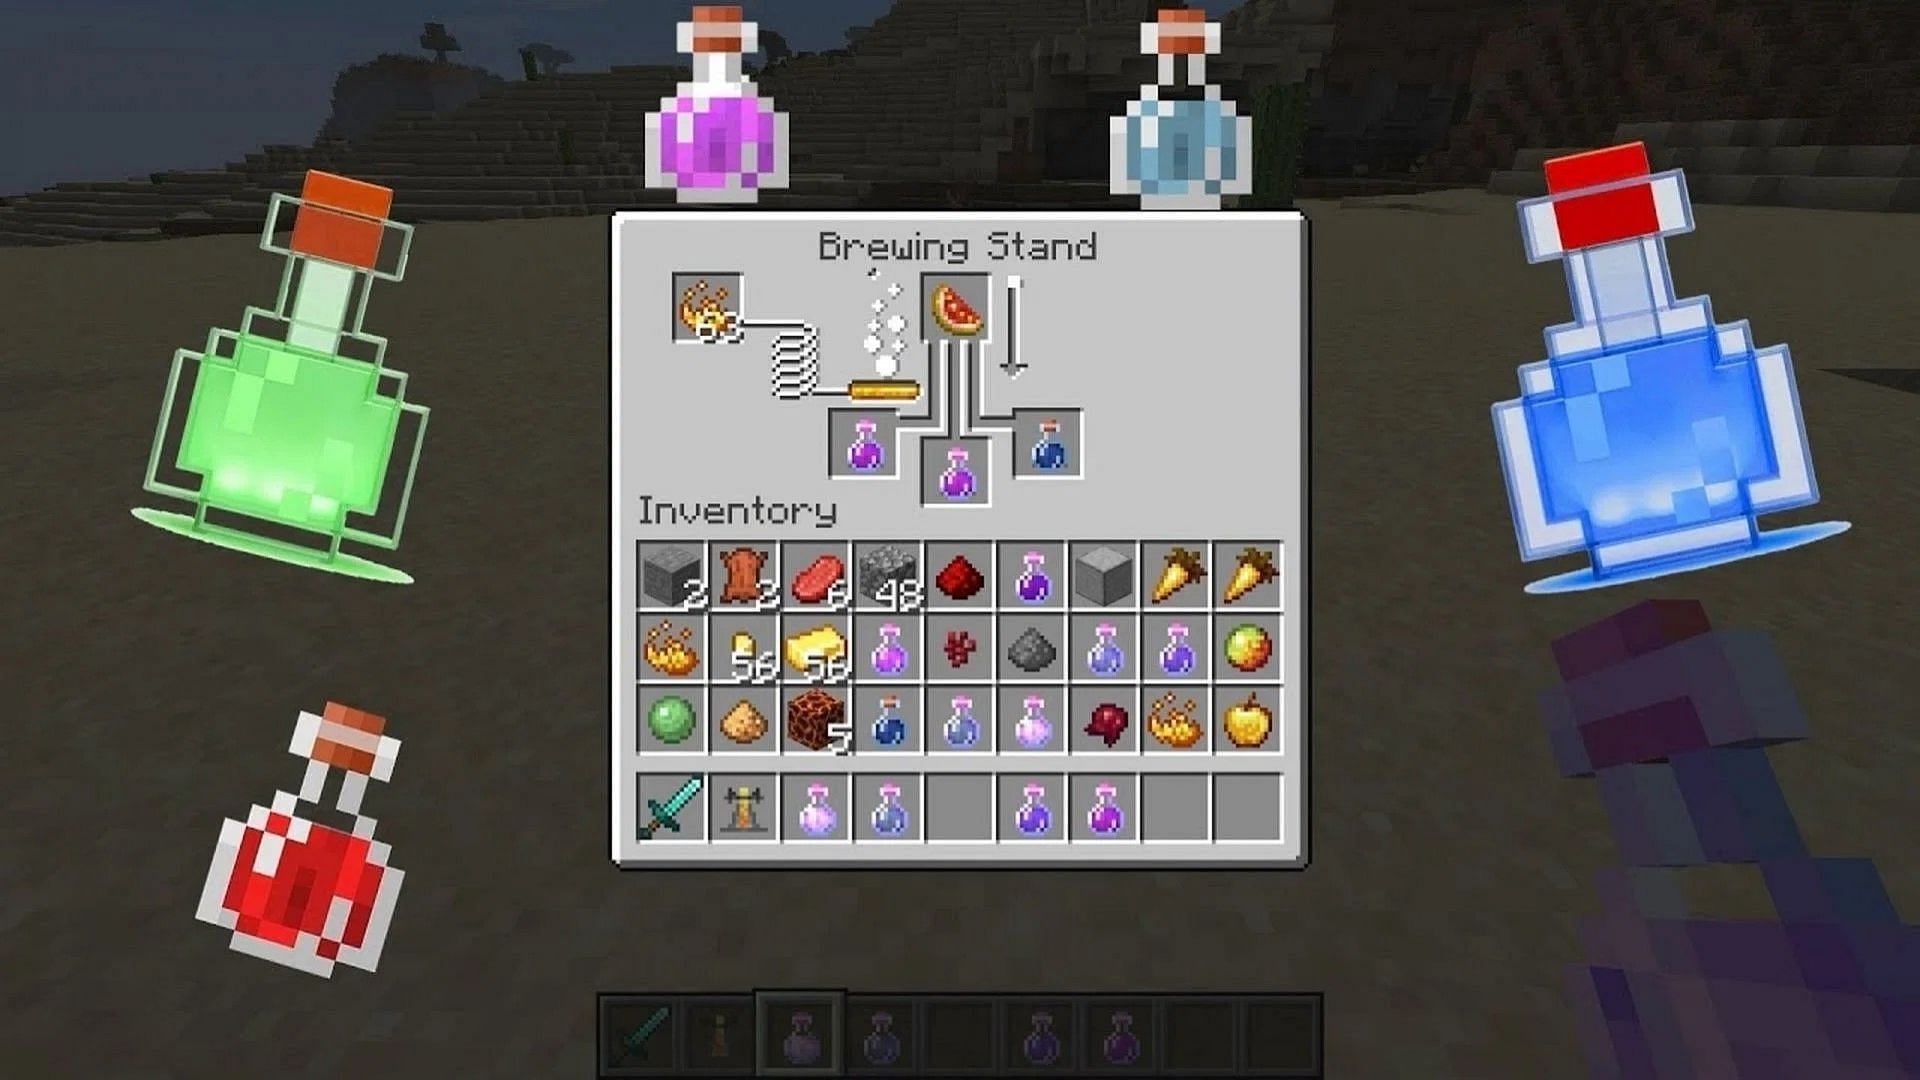 Potions being created in the brewing stand in Minecraft (Image via AserGaming/YouTube)